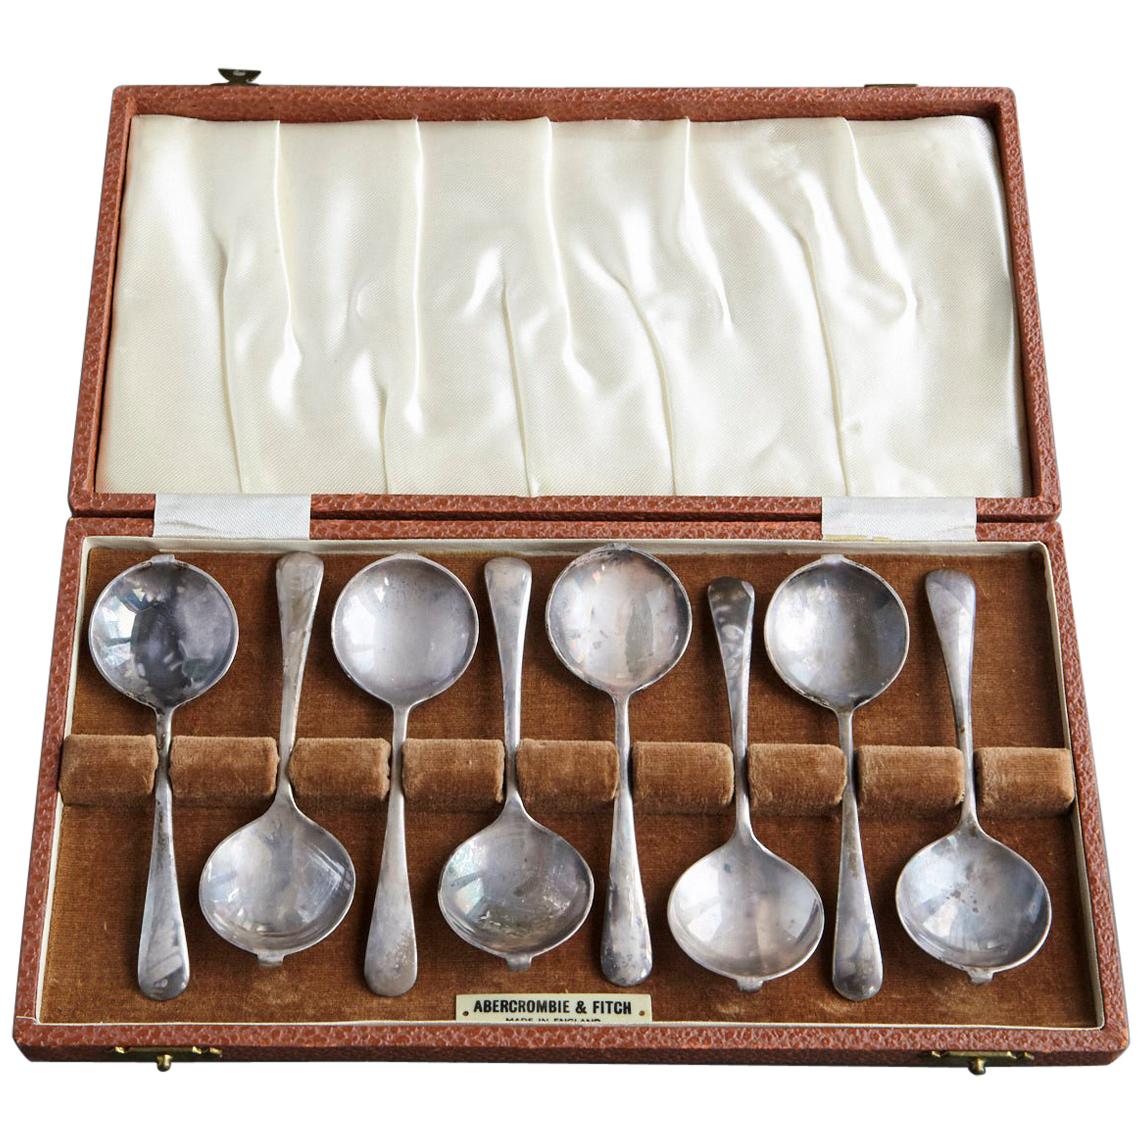 Set of 8 Silver Plated Cafe Diable Spoons, Abercrombie & Fitch England, 1915s